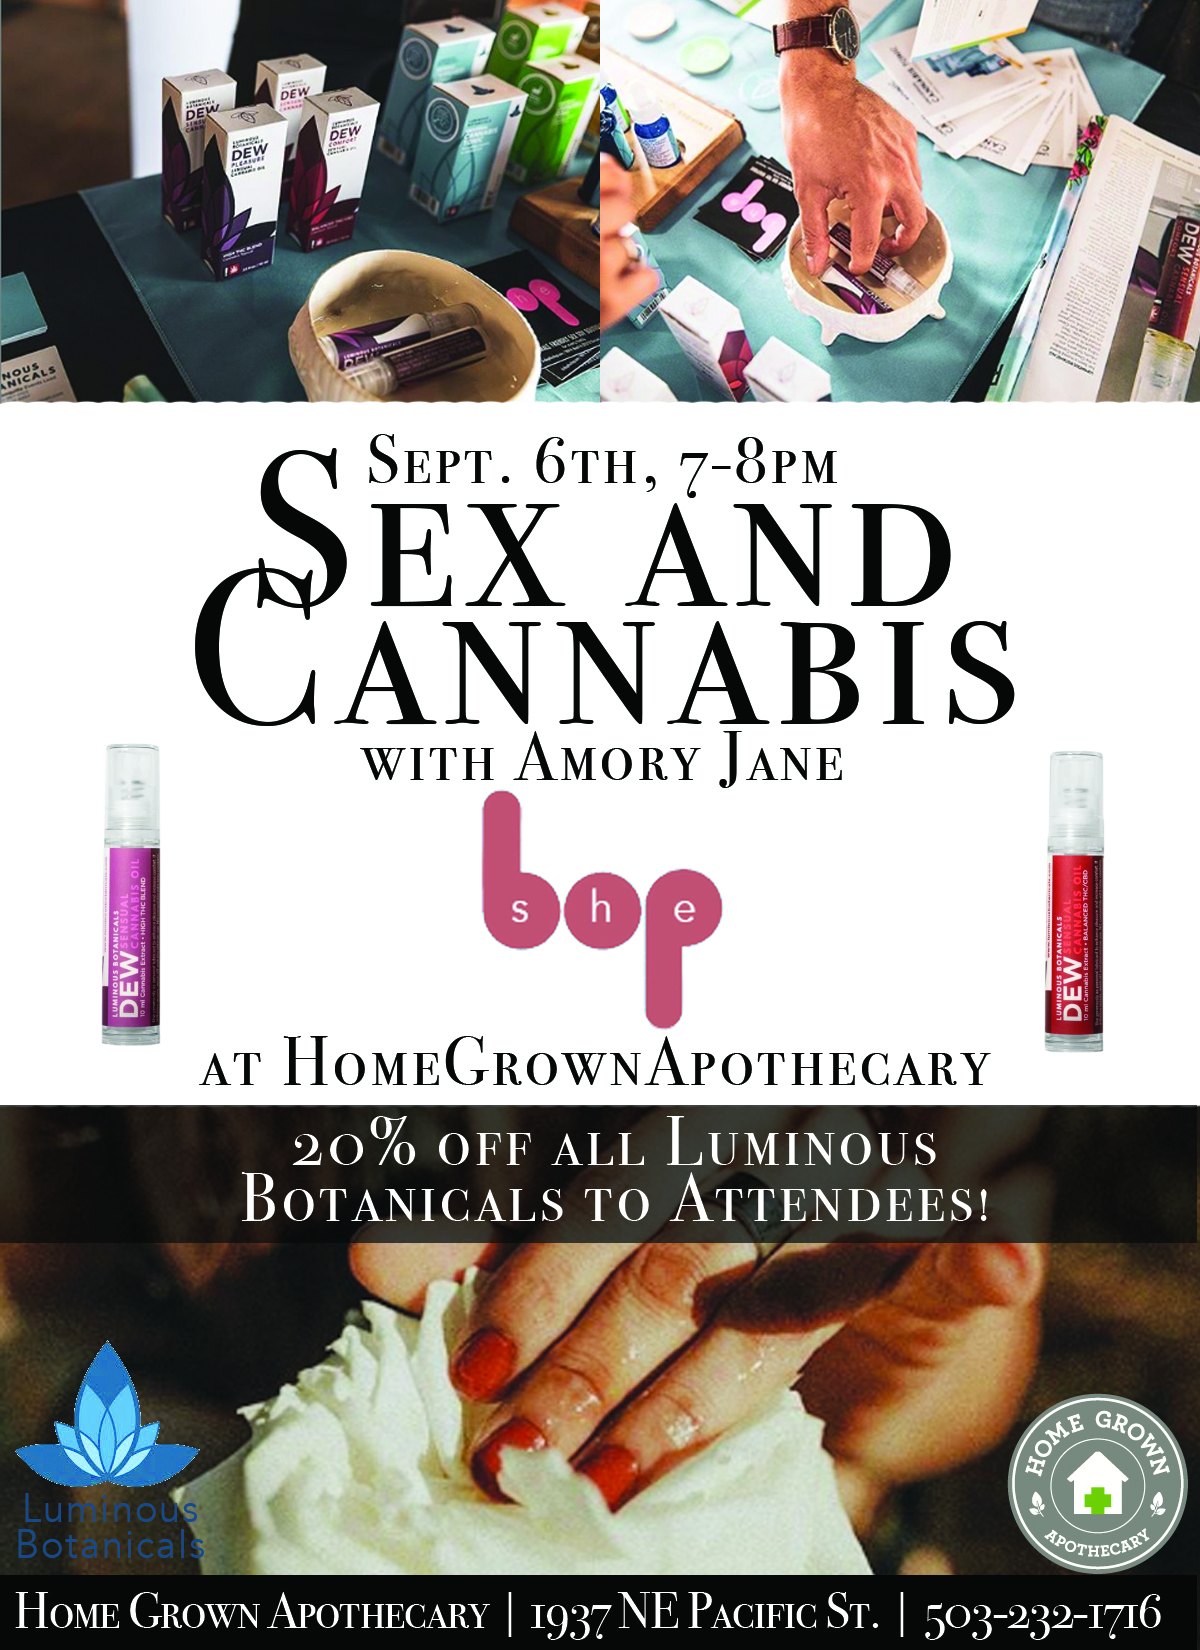 Sex and Cannabis Class with Amory Jane at Home Grown Apothecary